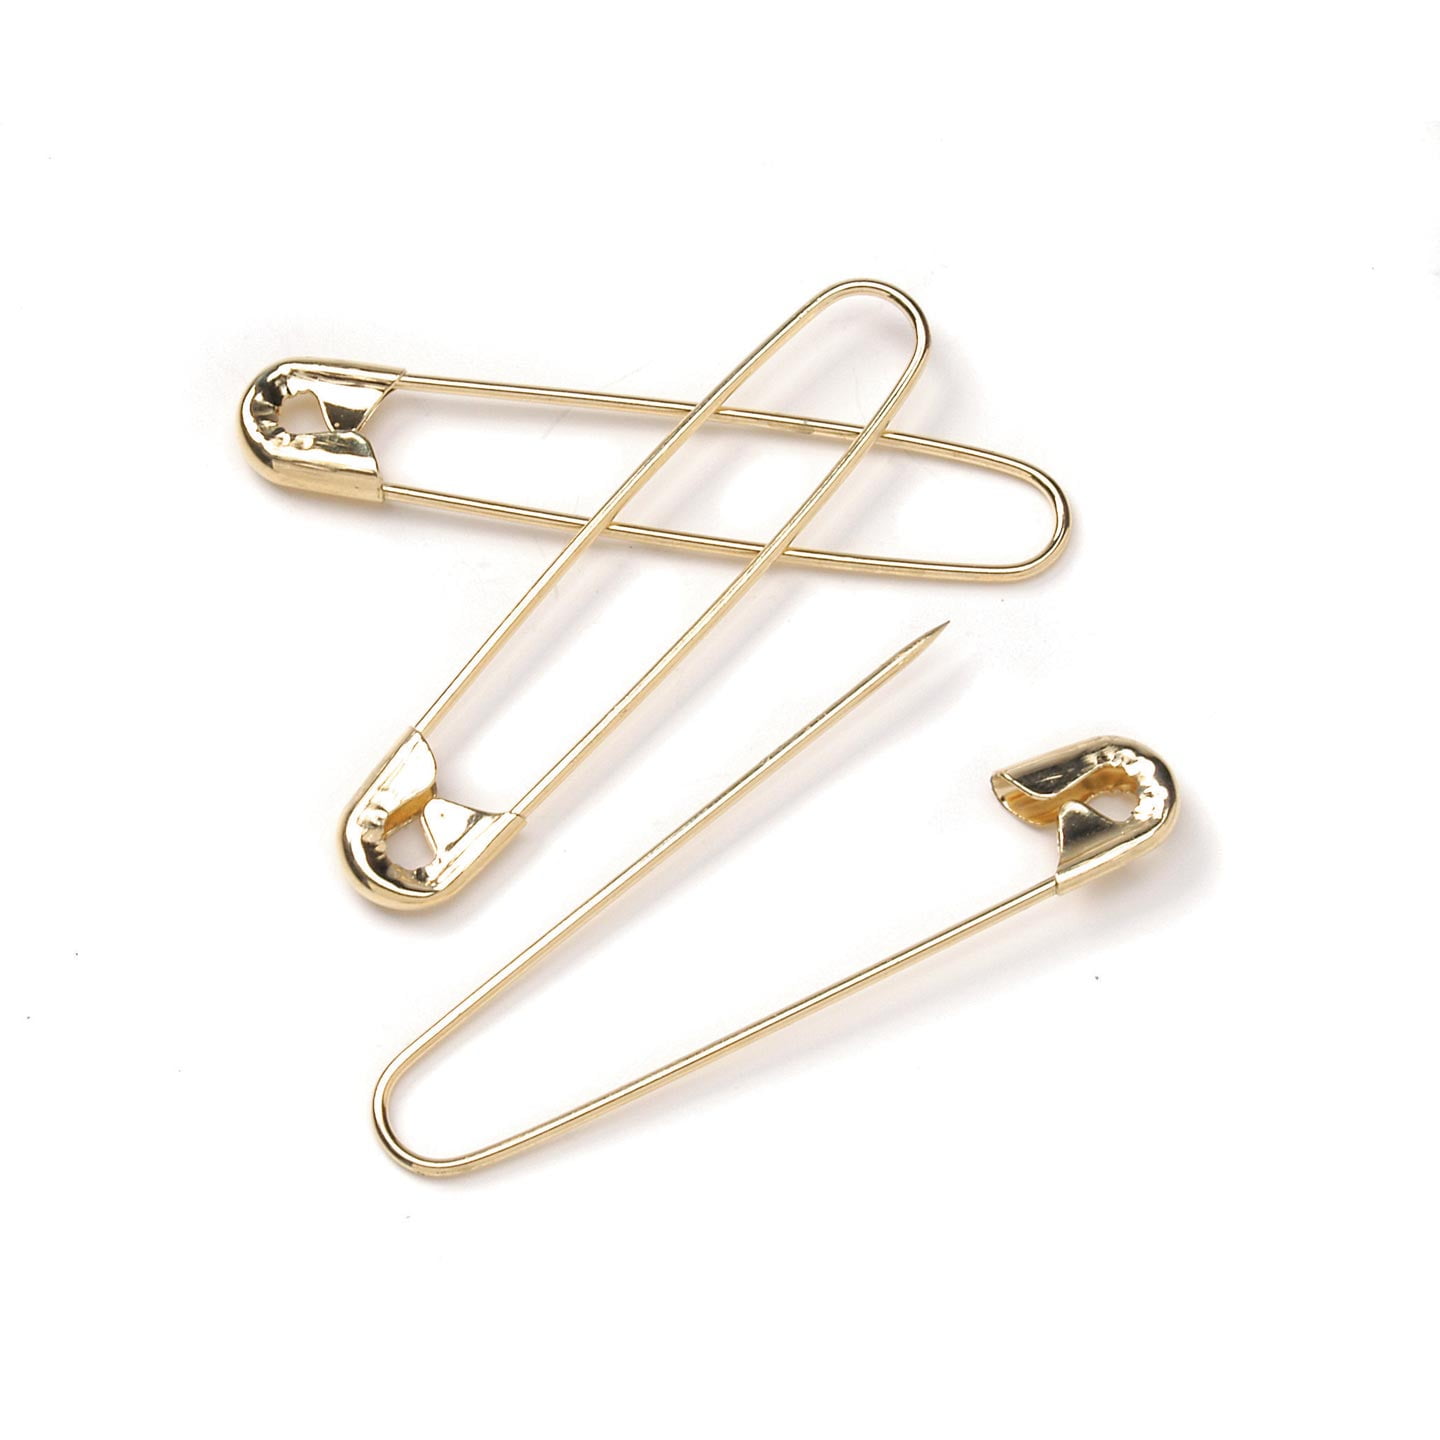 Lot of 1,000 Gold Brass Plated 1-5/8 Safety Basting Pins for